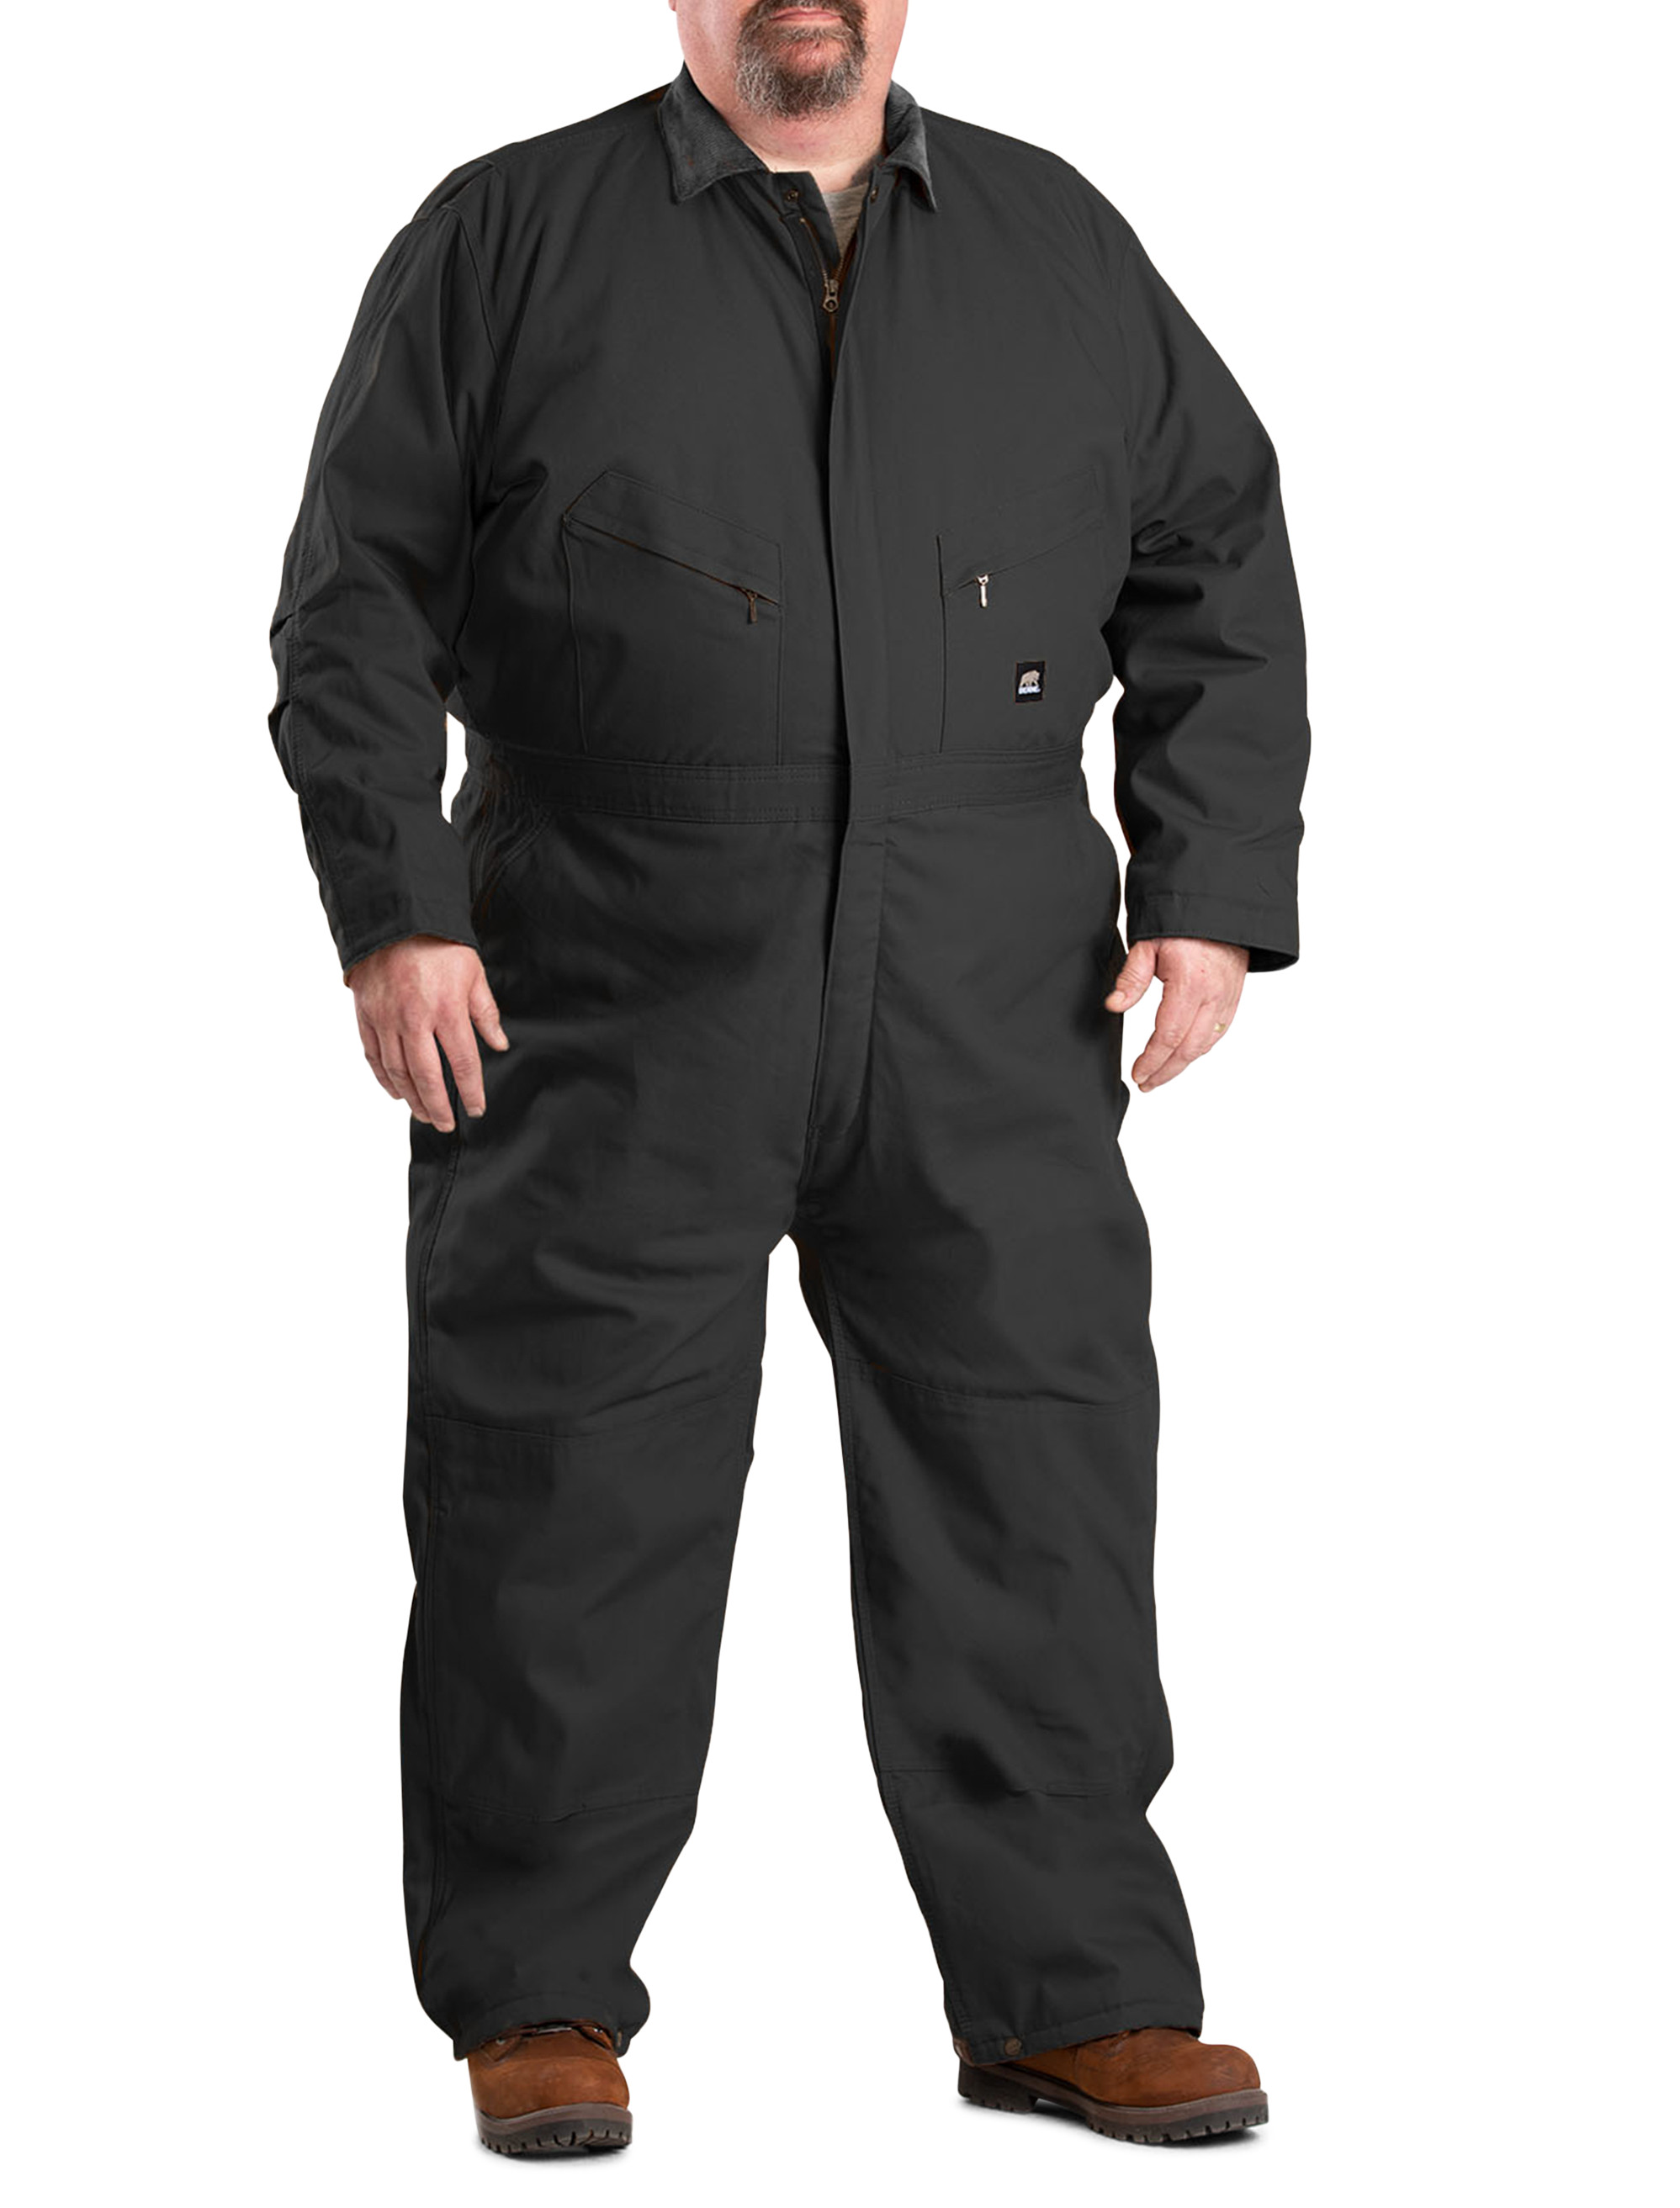 Berne Deluxe Insulated Duck Coveralls Casual Male XL Big & Tall | eBay